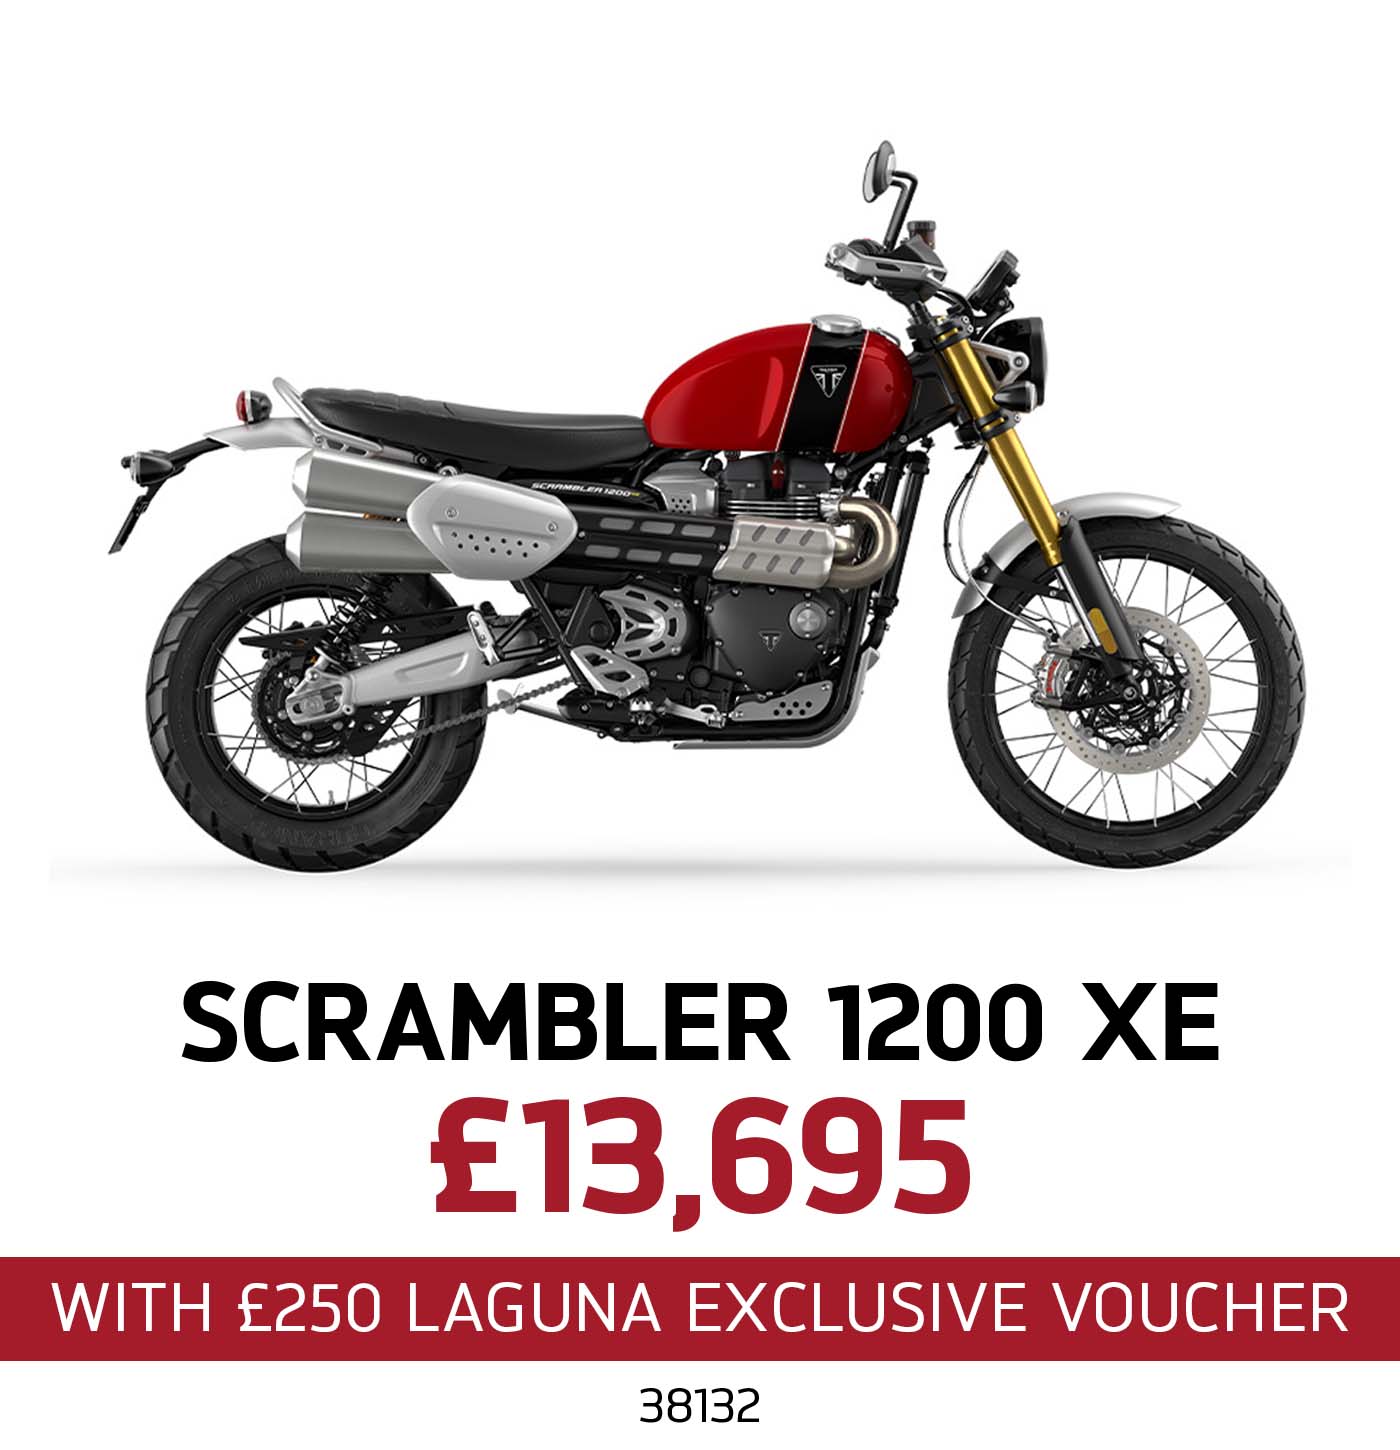 Enjoy £250 towards 1 of 3 fantastic options with your new Triumph motorcycle, only at Laguna Triumph in Ashford and Maidstone.